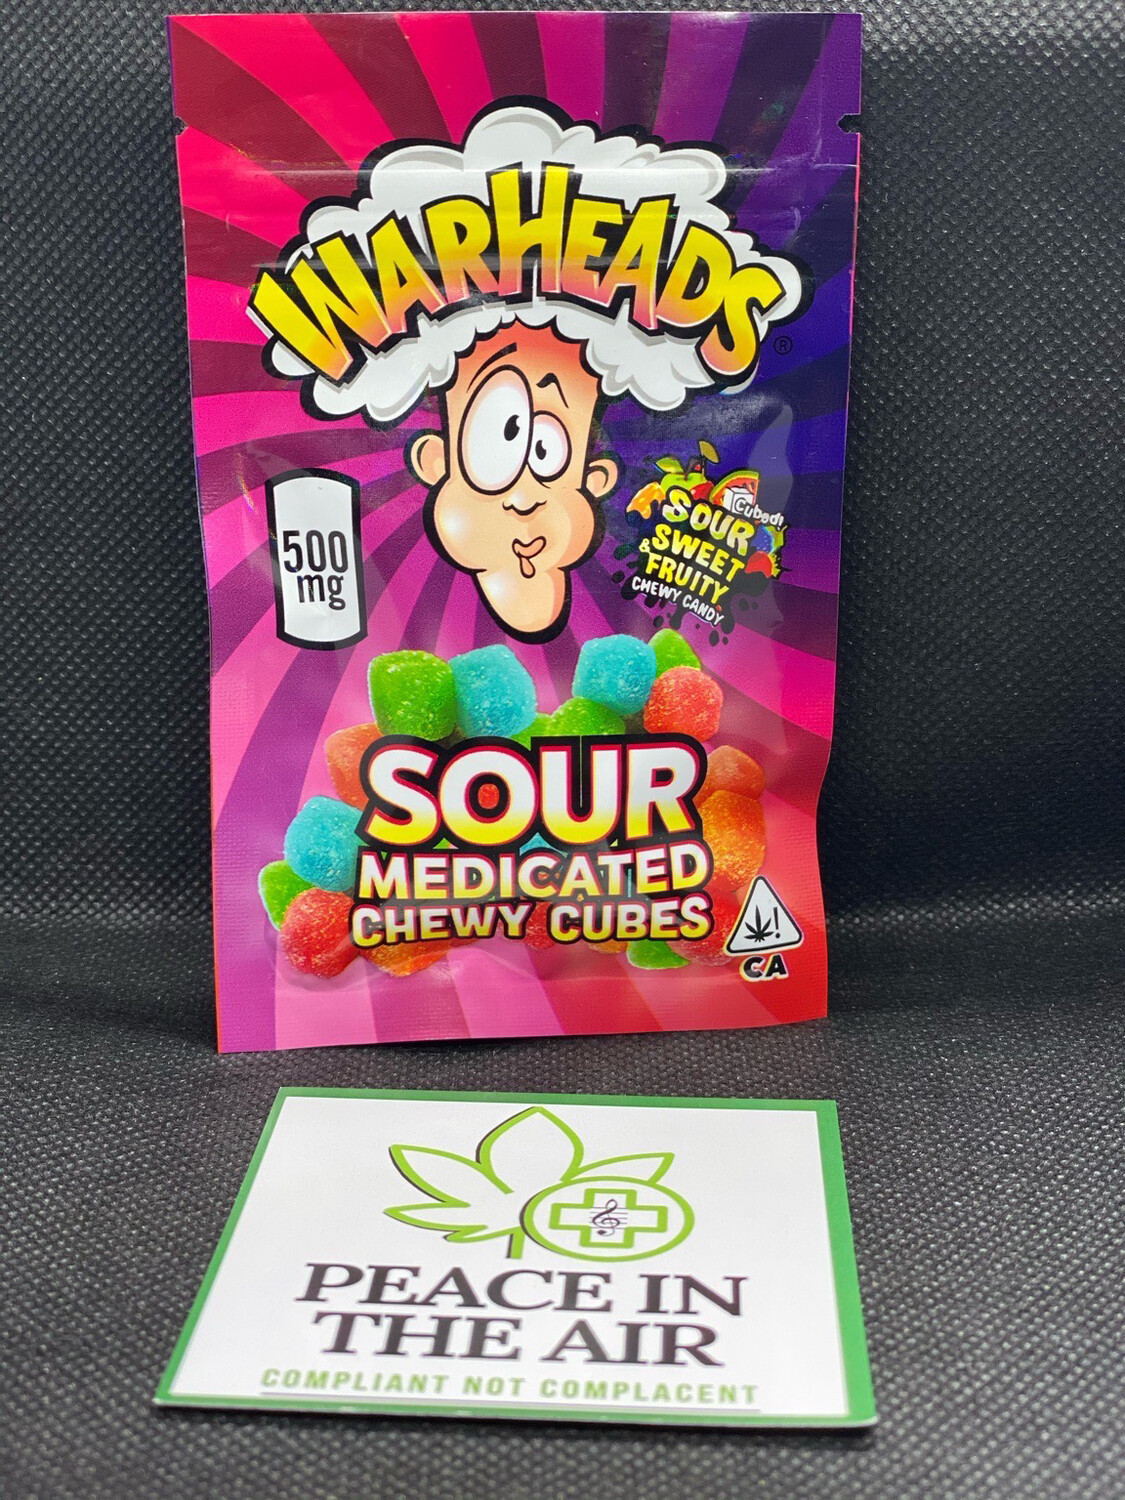 Warheads Chewy Cubes 500mg